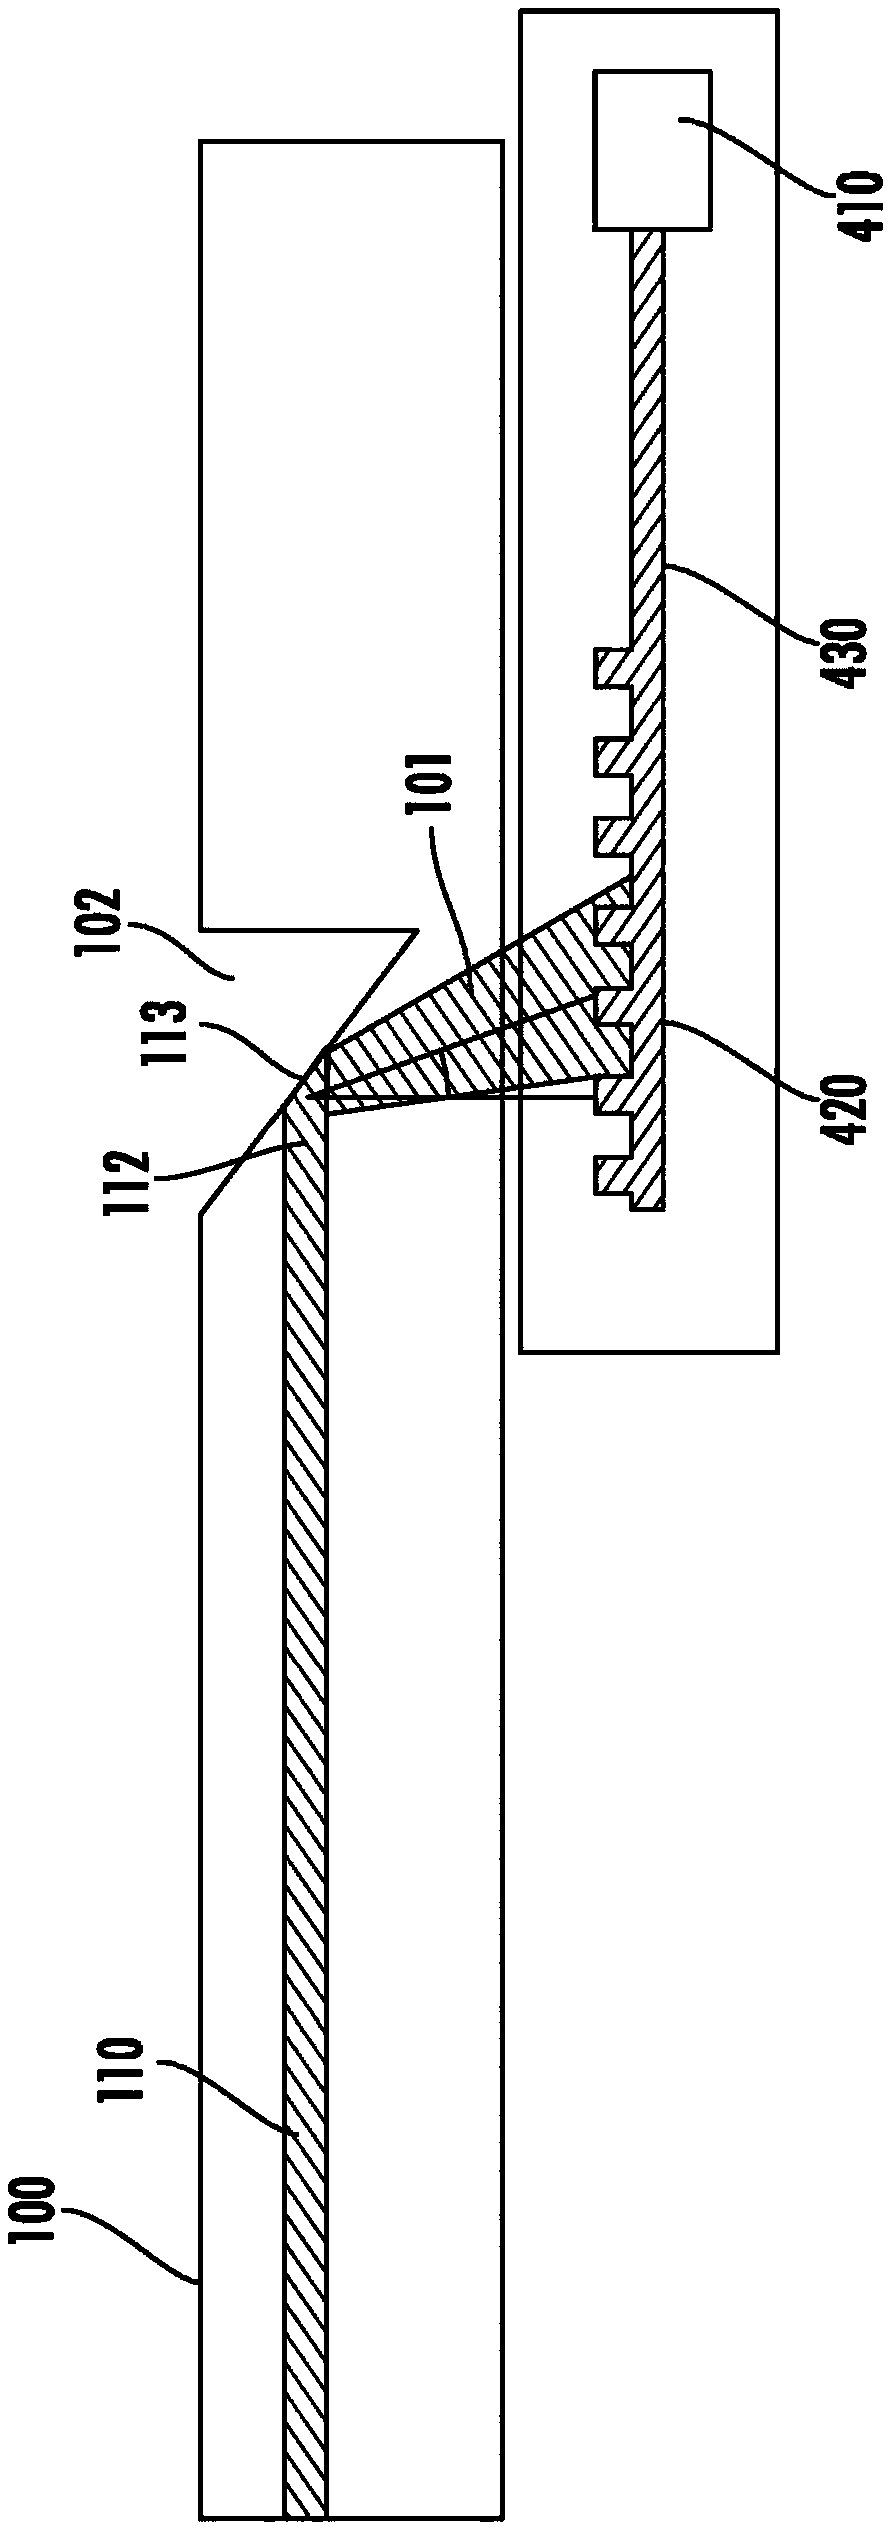 Interposer assemblies and arrangements for coupling at least one optical fiber to at least one optoelectronic device